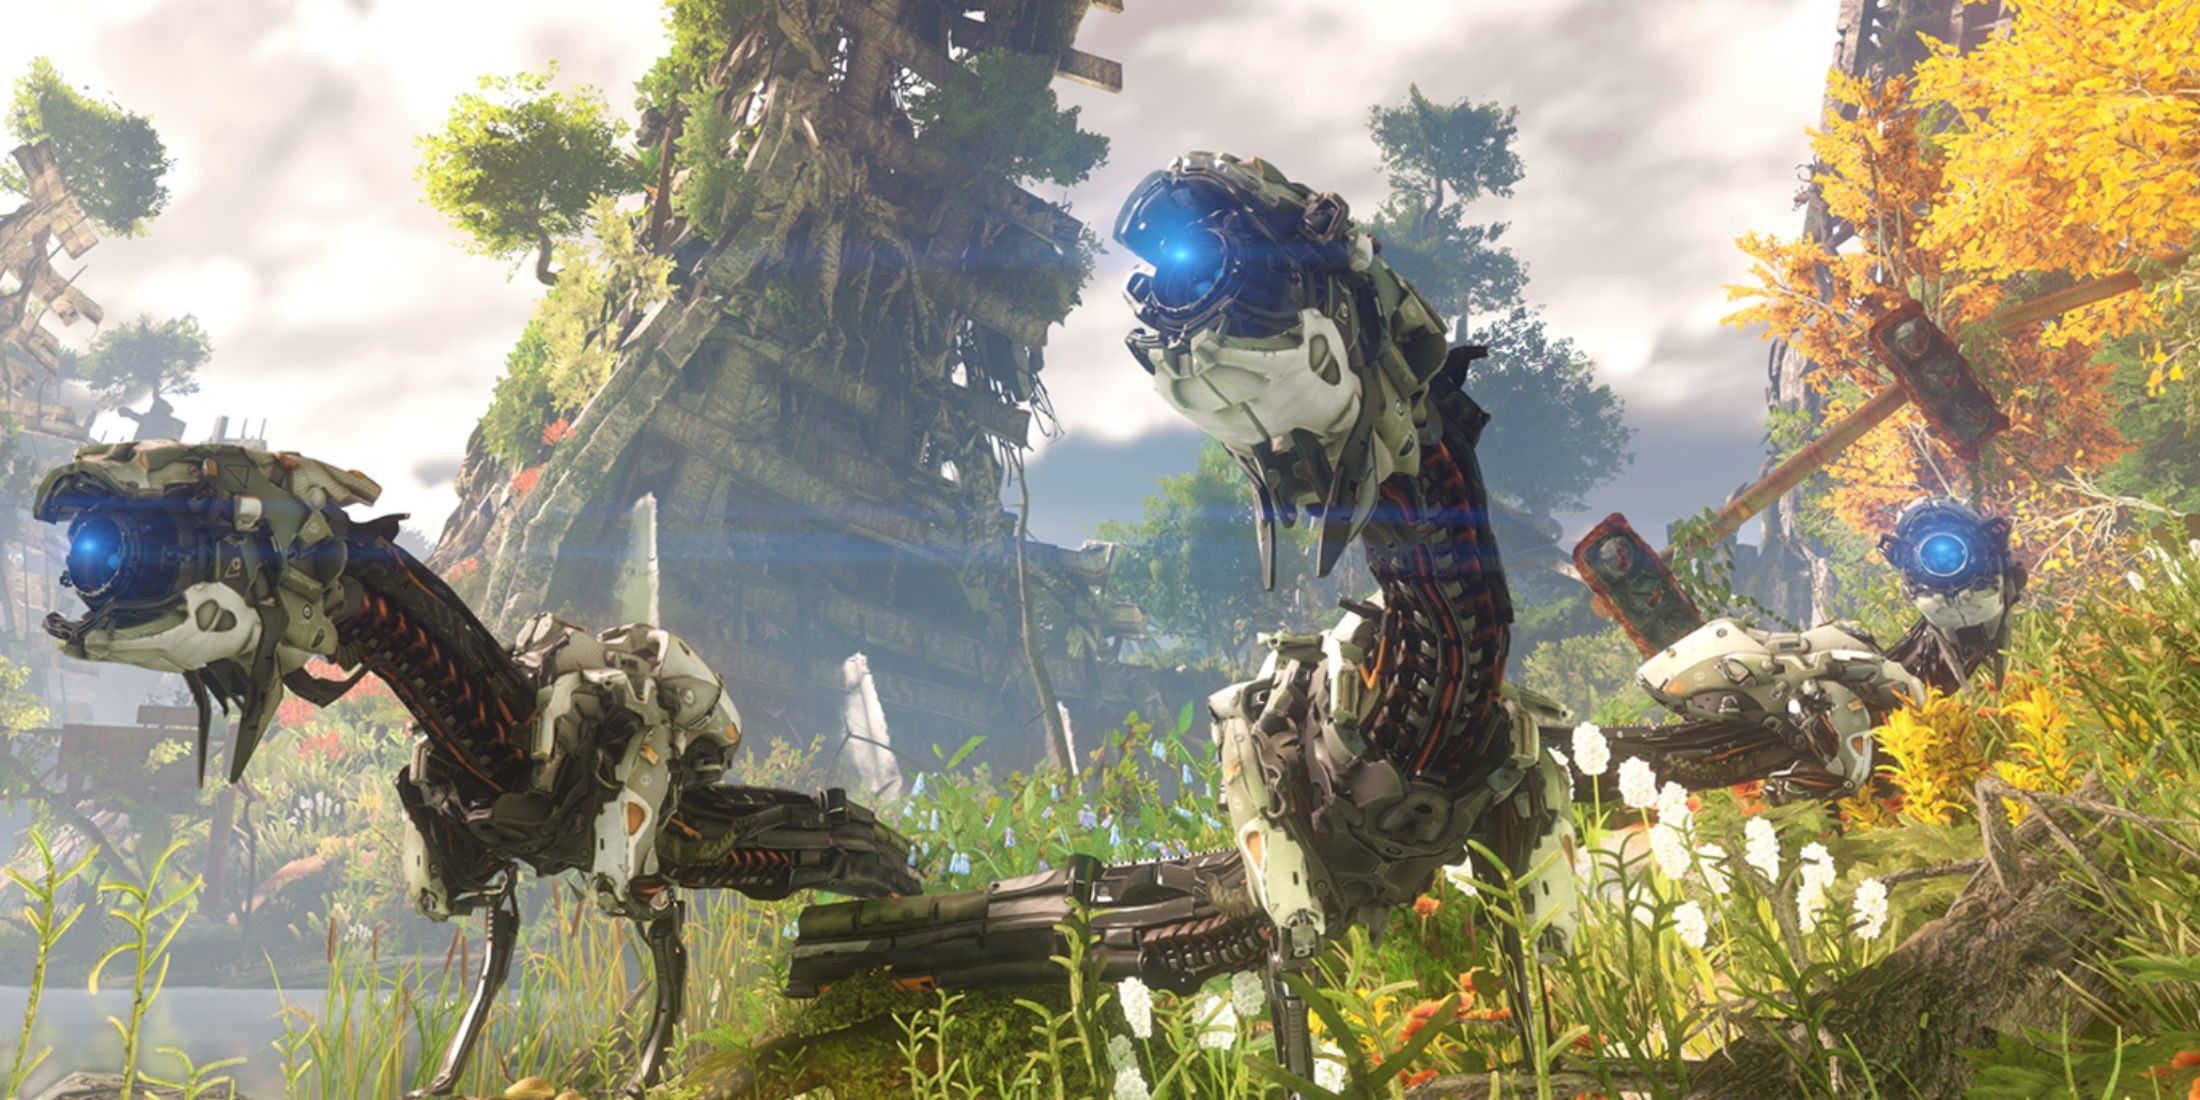 Horizon Zero Dawn Is An Open-World Game With Science Fantasy Aspects